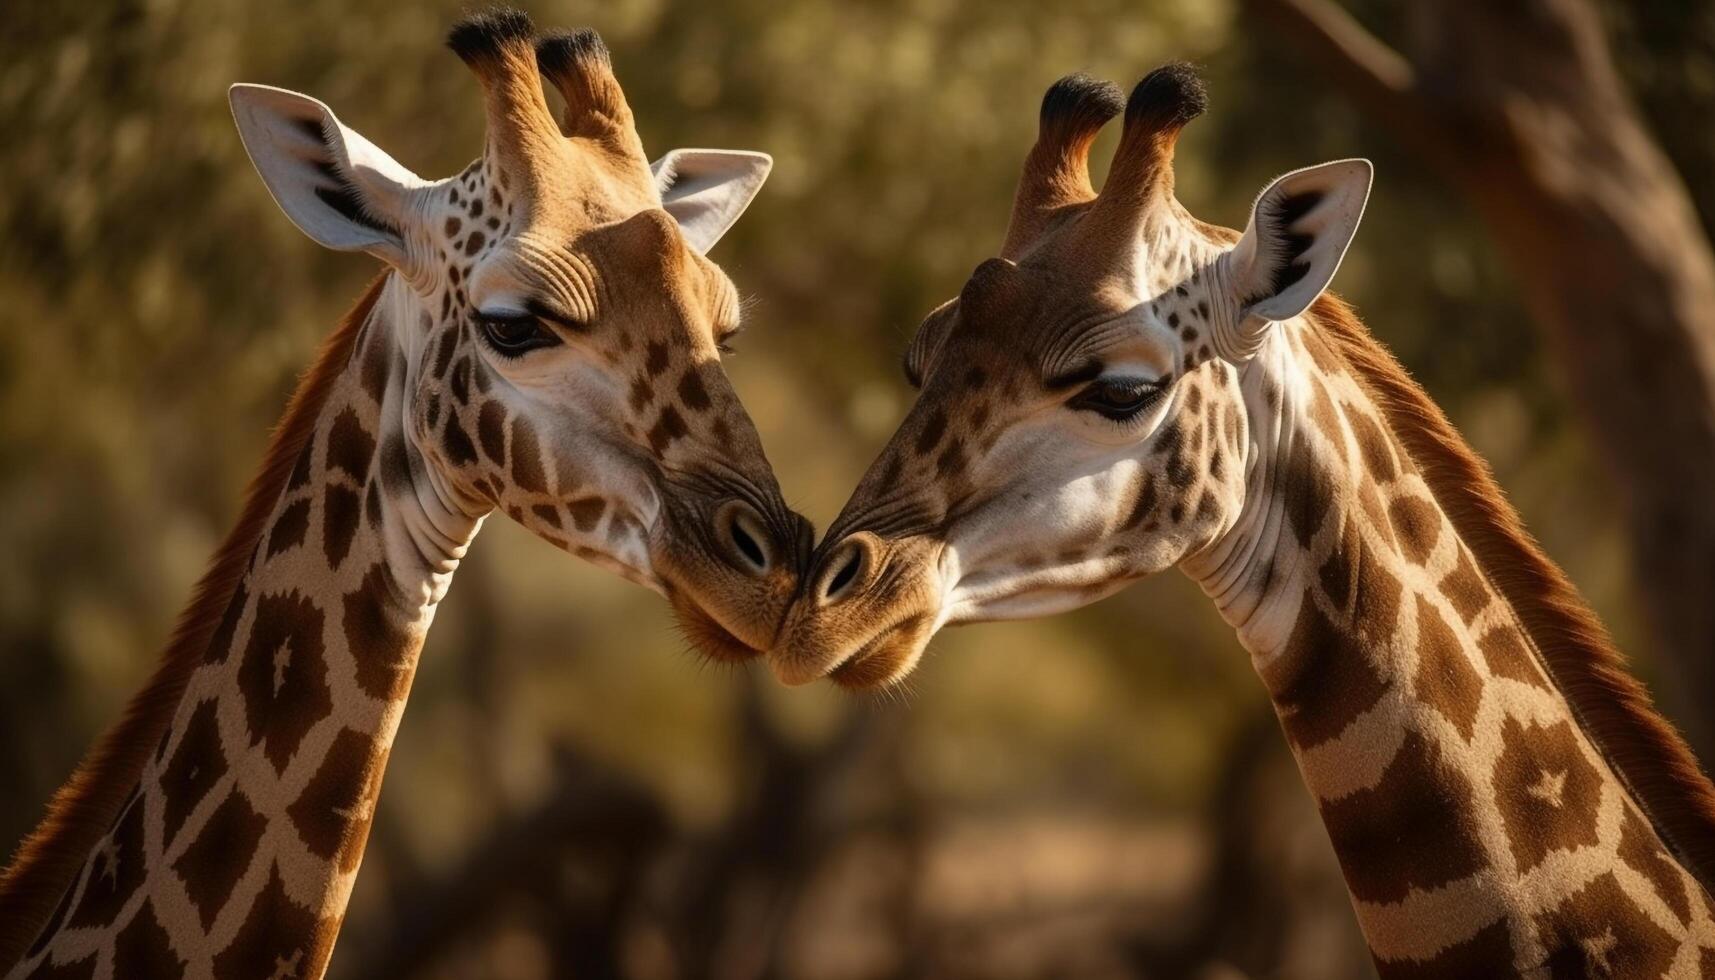 Giraffe family standing in the wilderness, looking at camera closely generated by AI photo